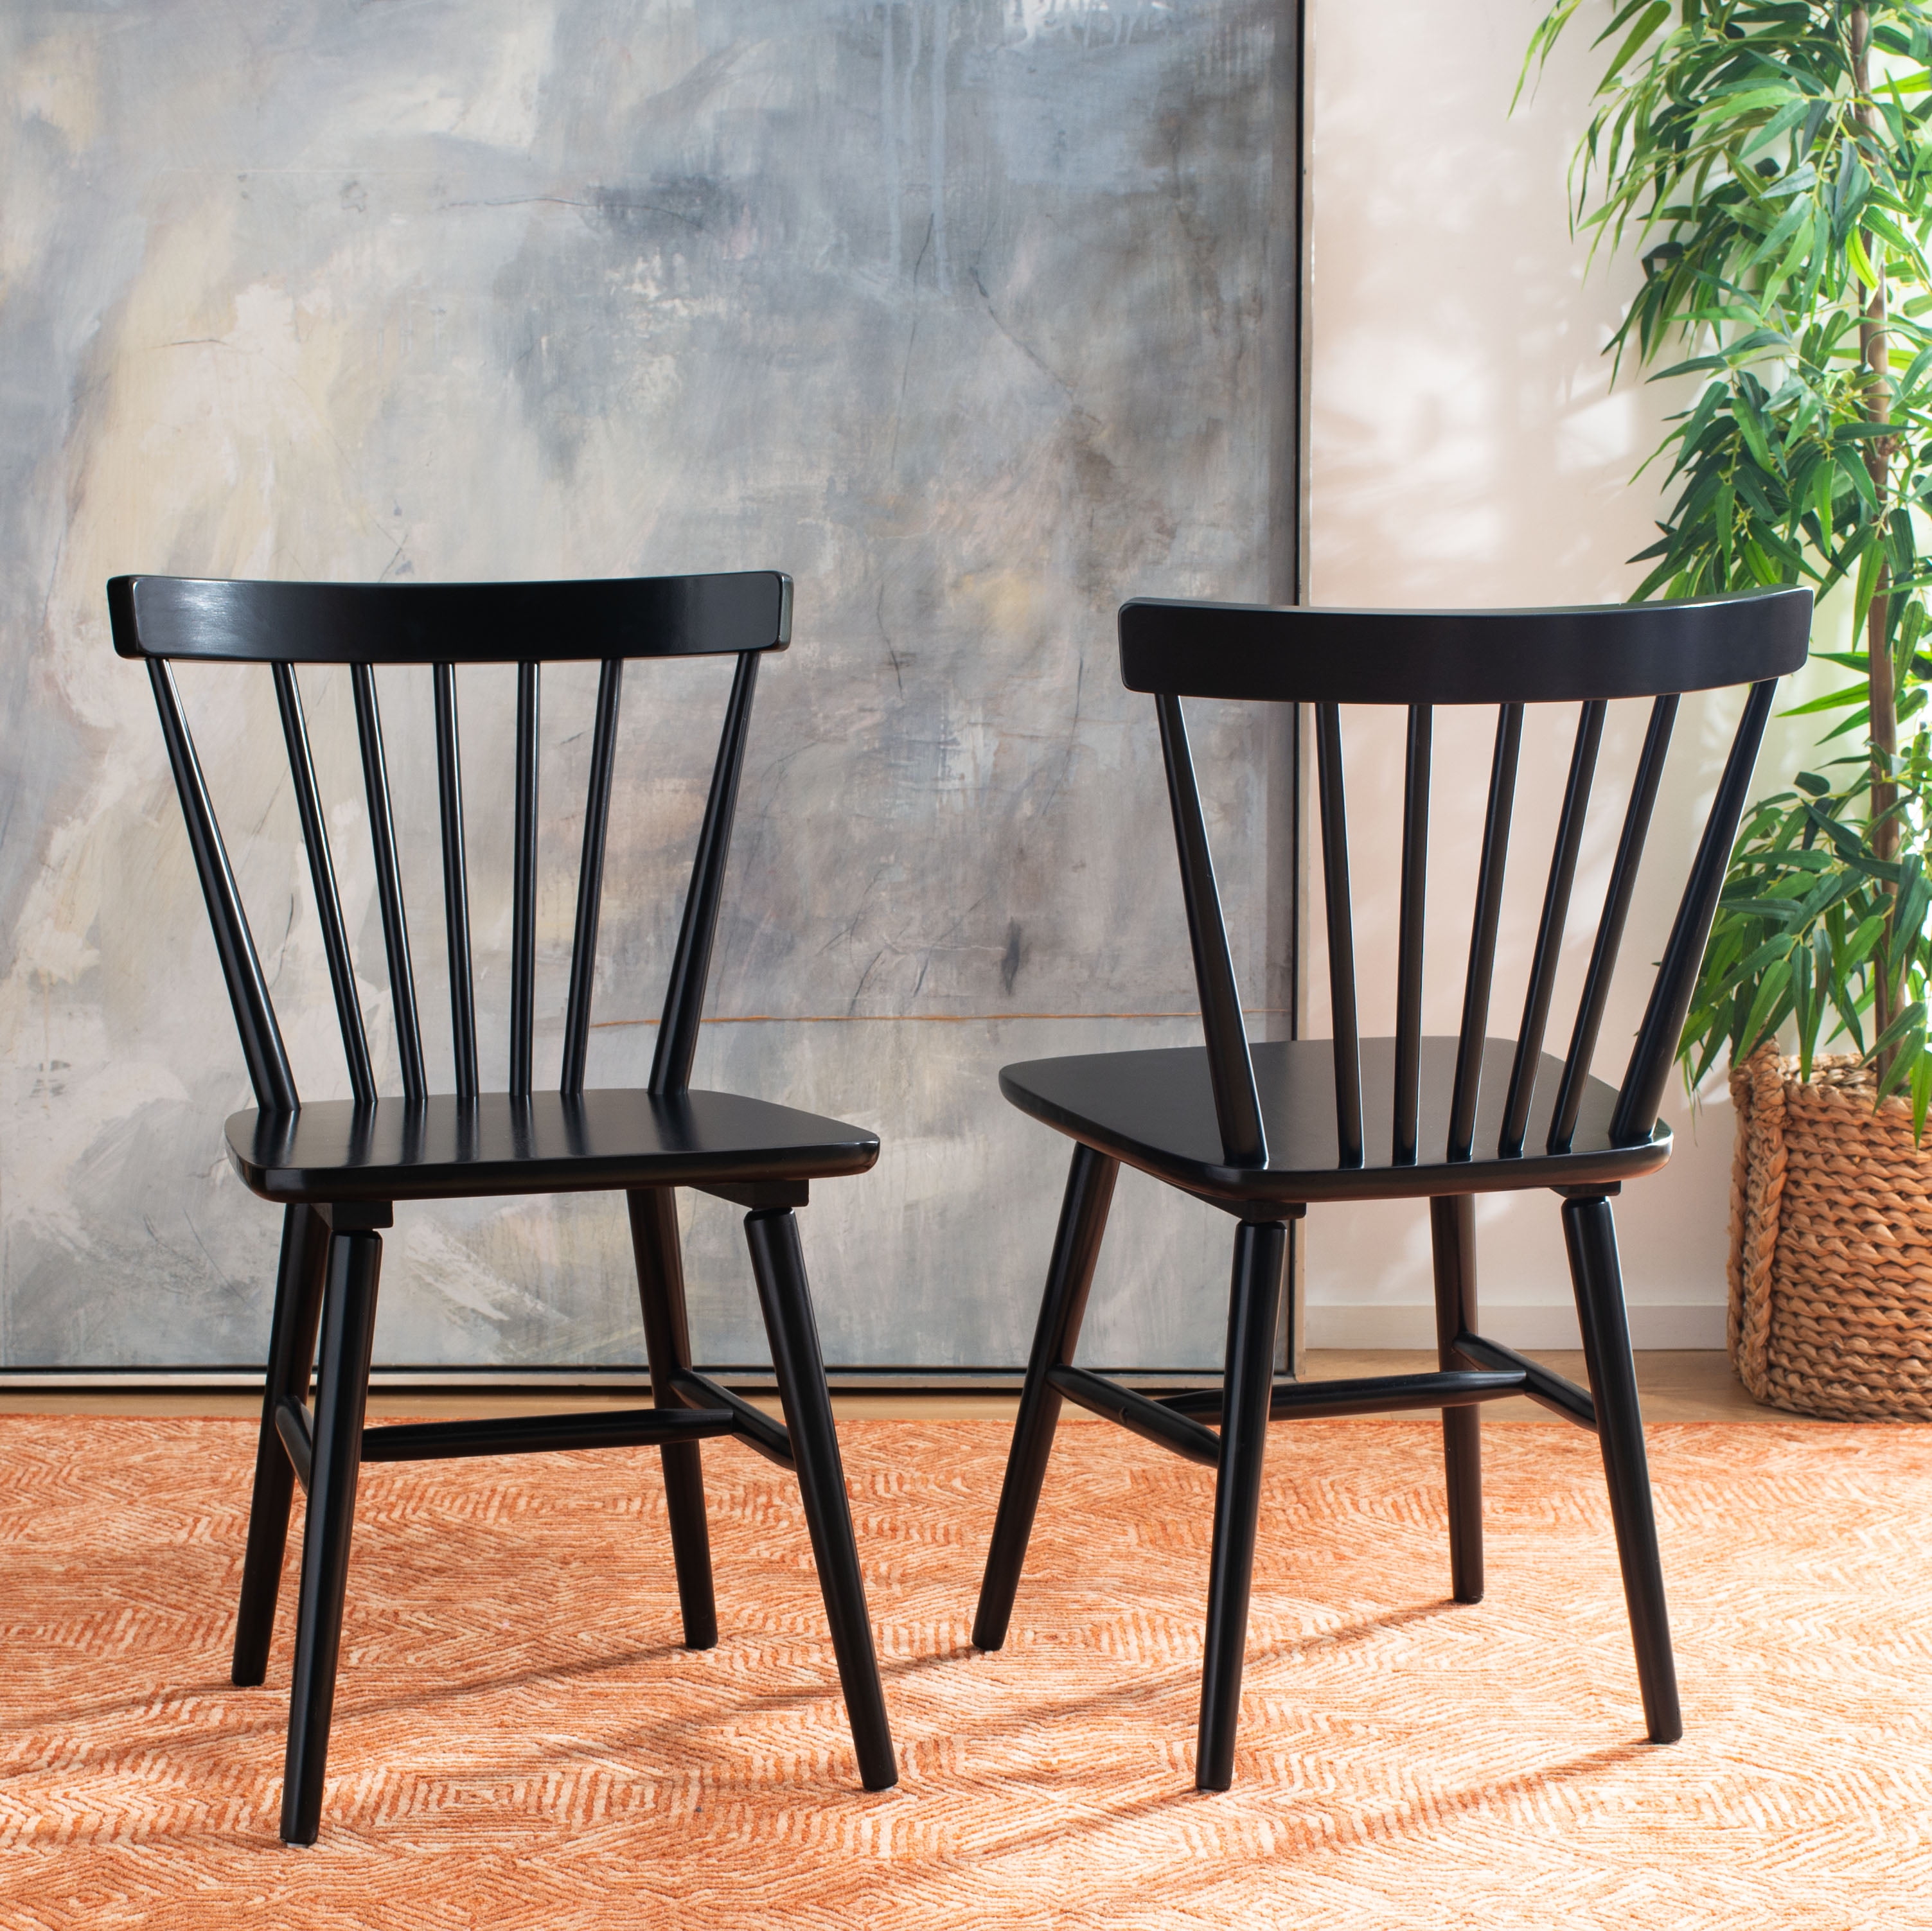 Safavieh Winona Spindle Back Dining Chair, Set of 2, Black